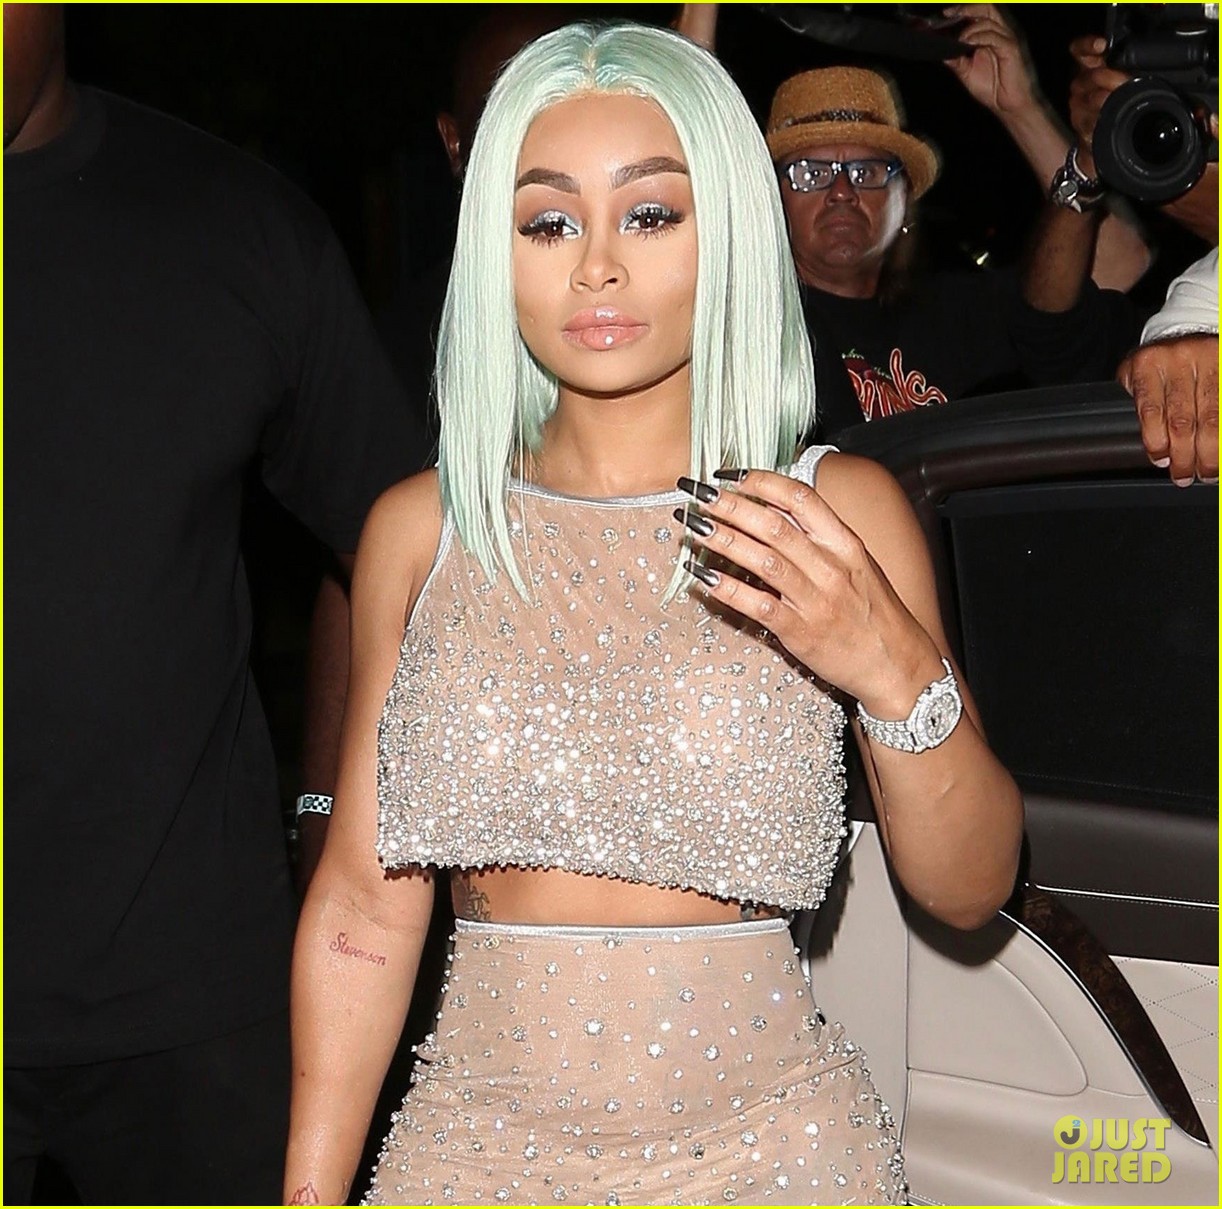 Blac Chyna Talks About Rob Kardashian Posting Personal Photos of Her: 'That's Just Not ...1222 x 1209